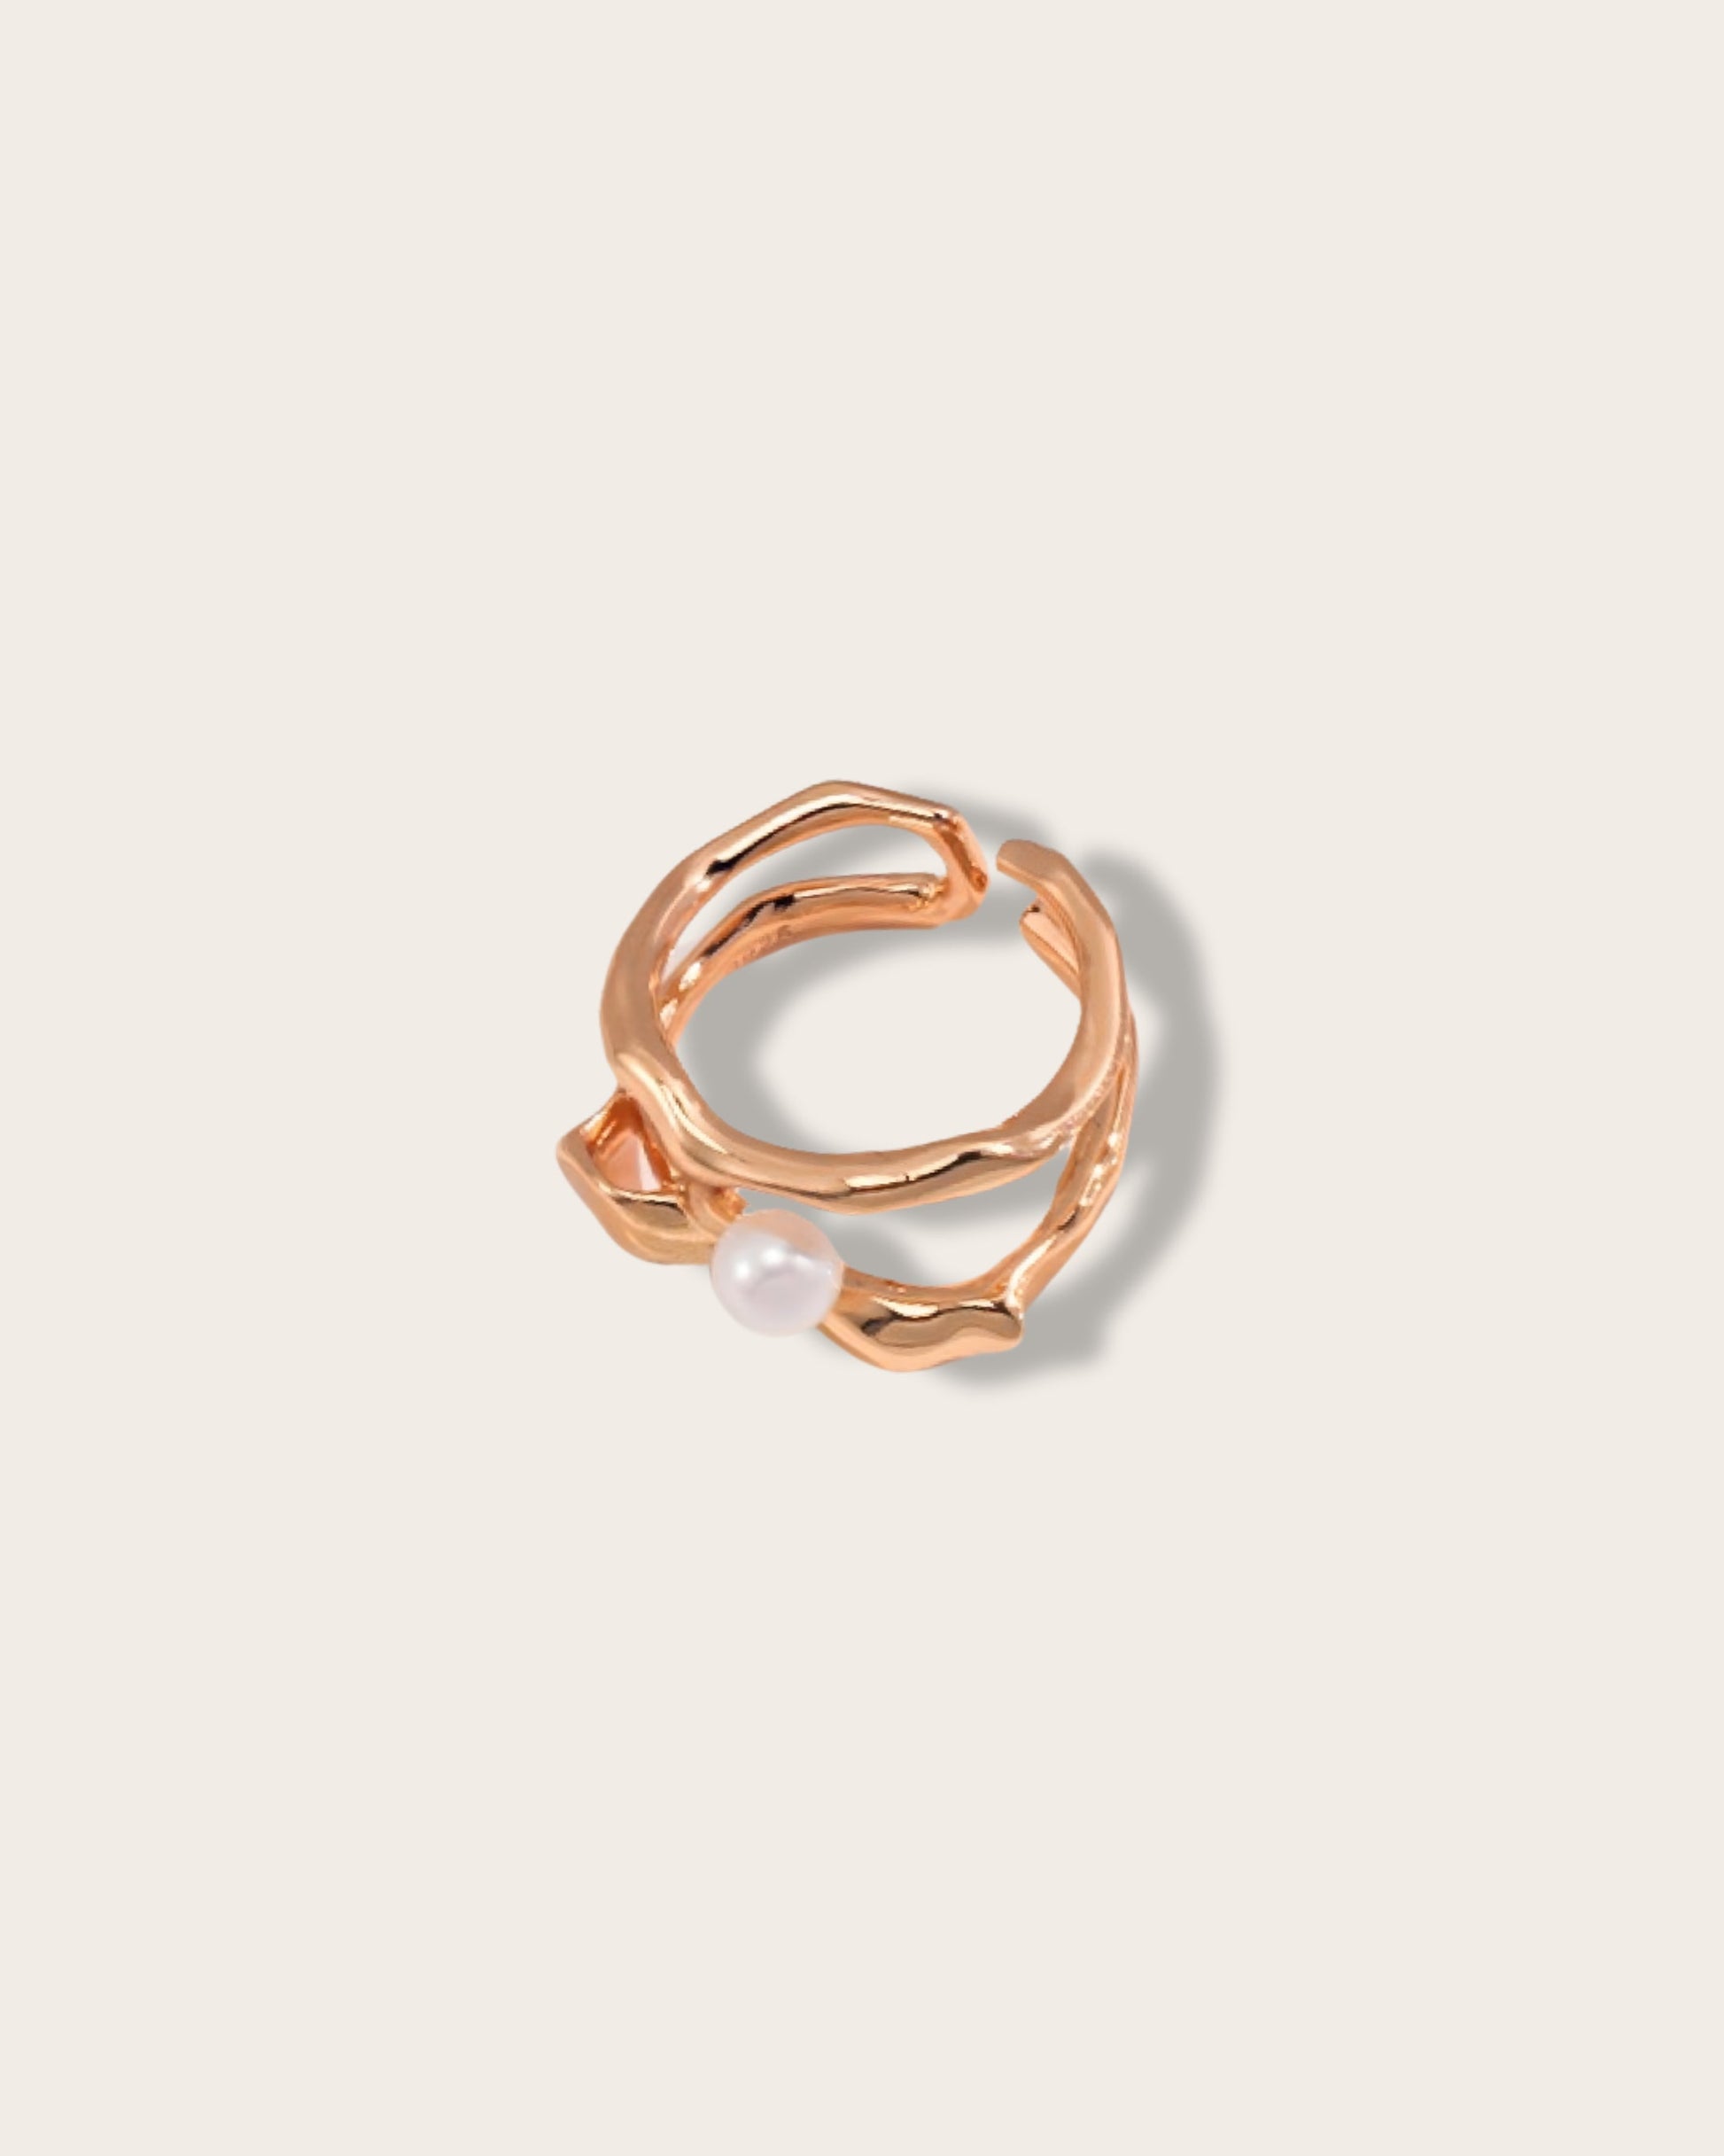 Flowing Stream Pearl Ring - Pearl Luminance Gold Ring - S925 Sterling Silver with 18K Gold Vermeil  Ring - Design captures the subtle and organic flow of a stream